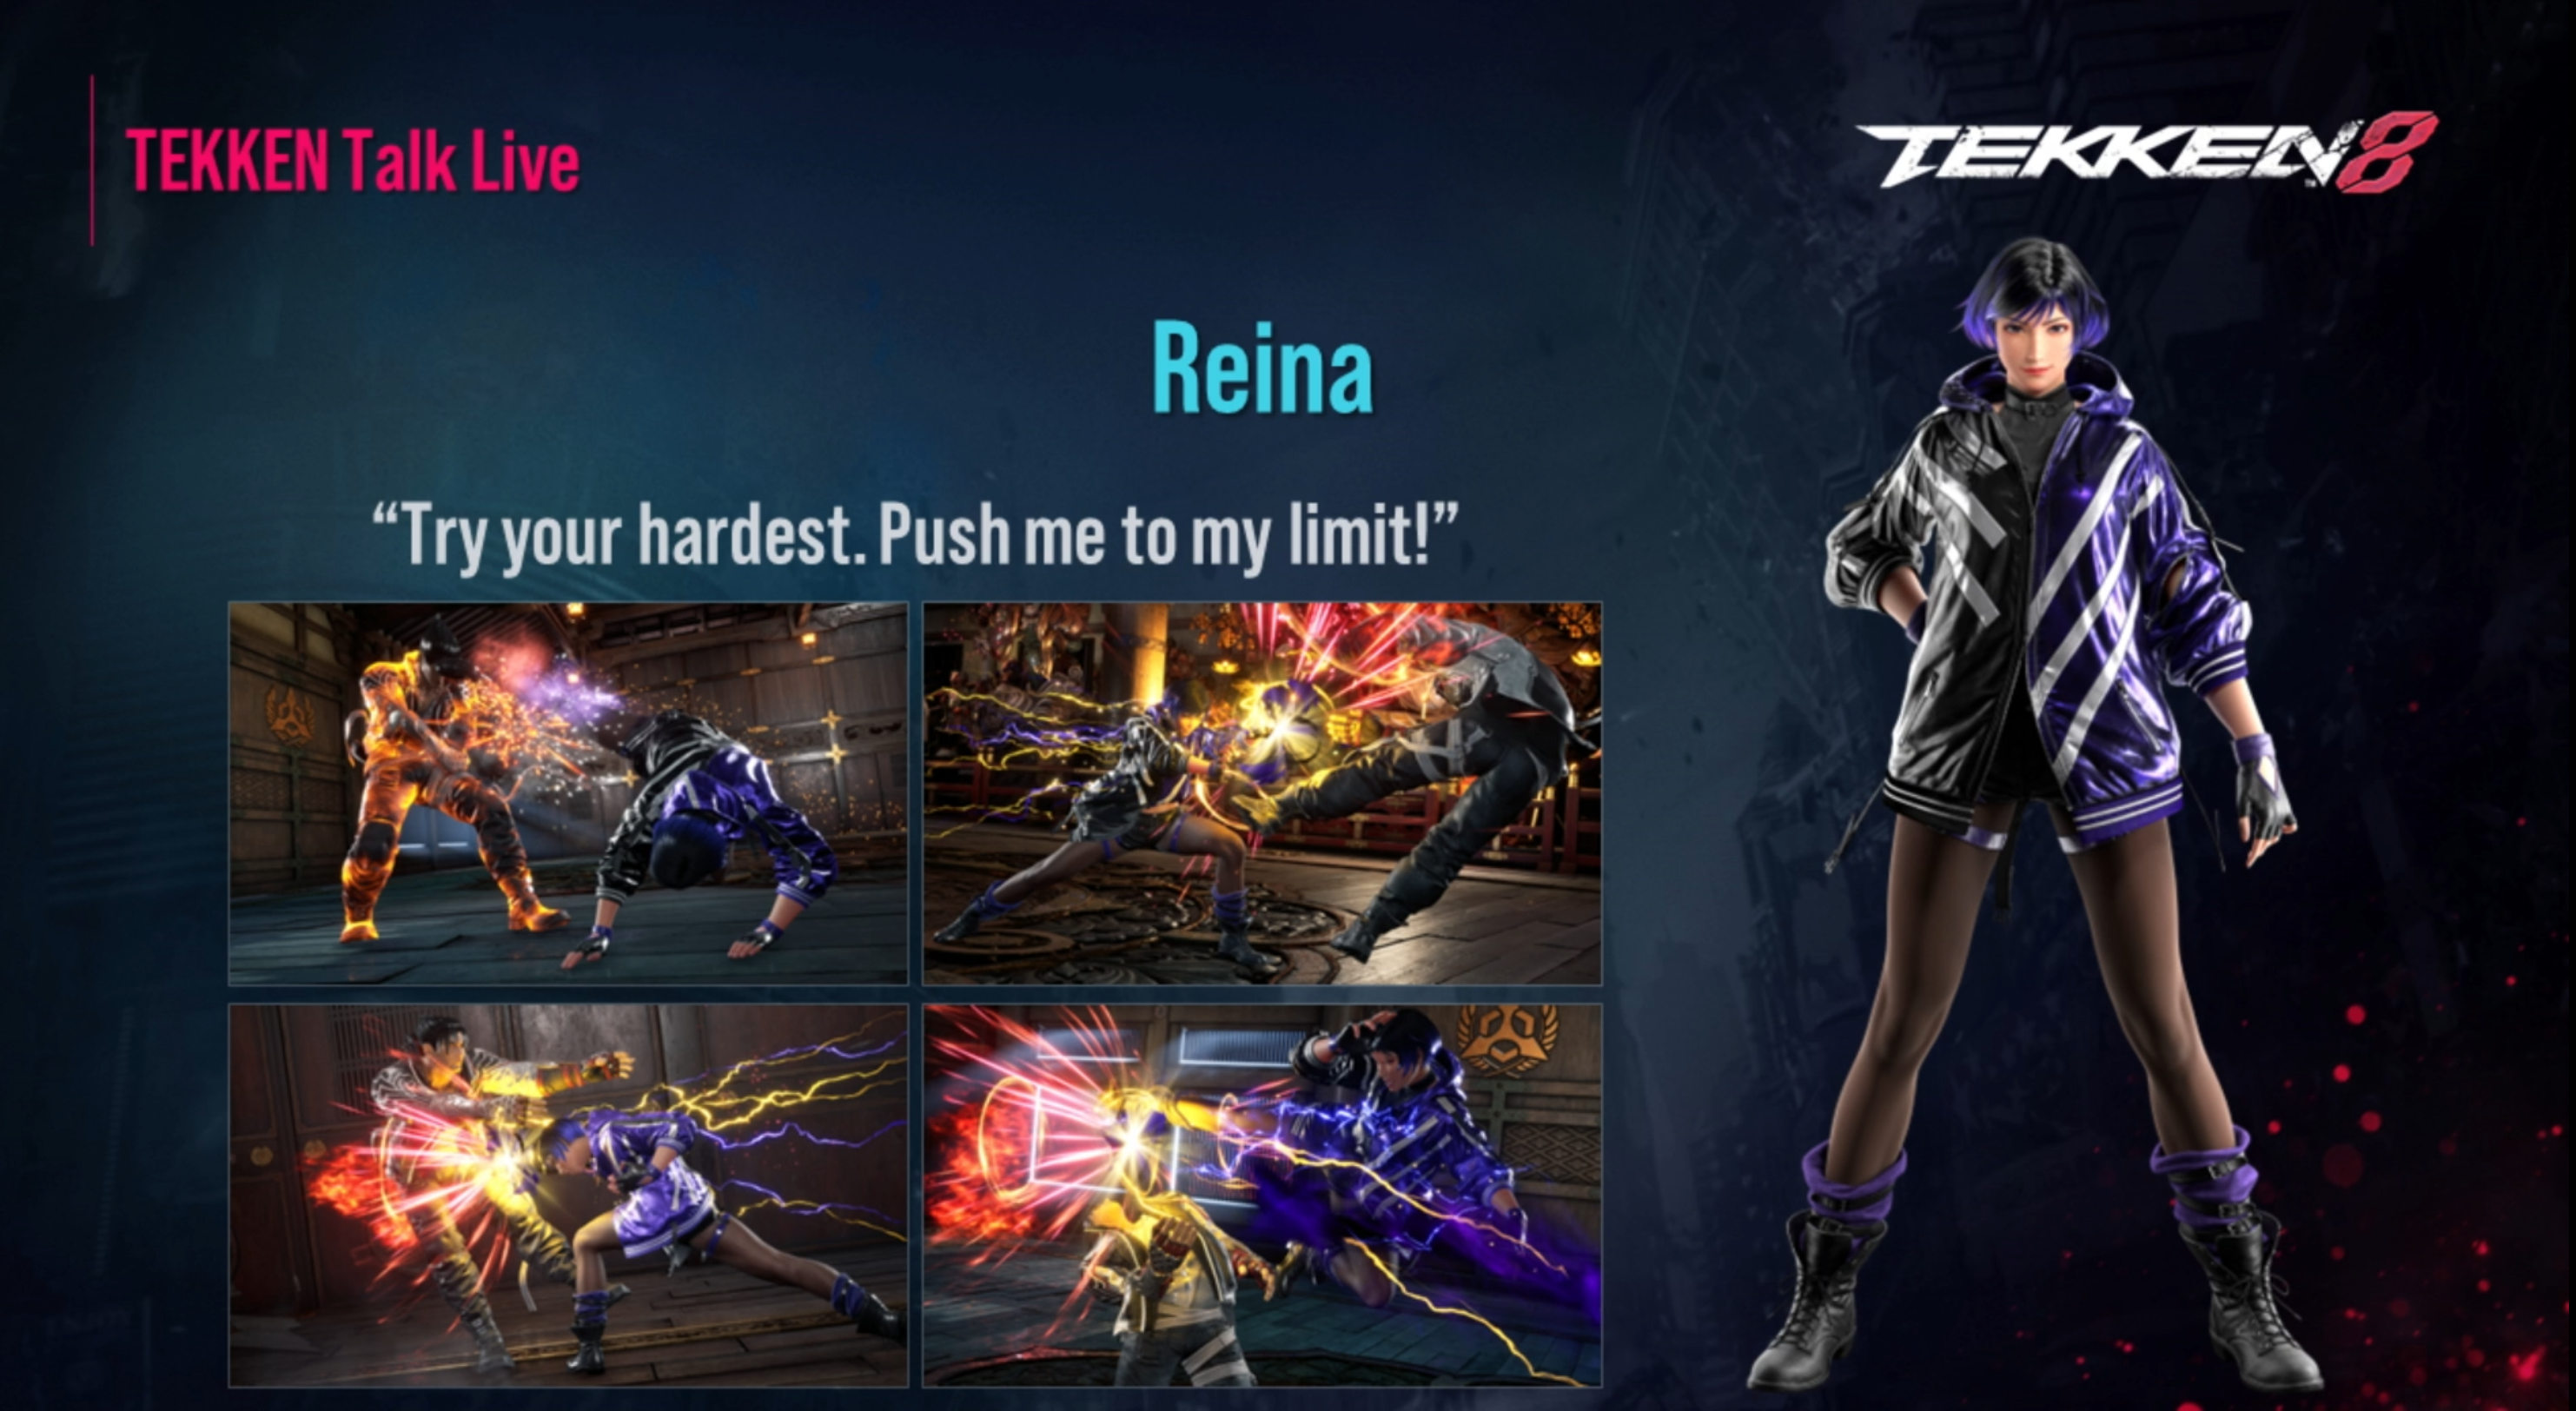 Tekken 8's new fighter Reina rounds out the 32-character launch